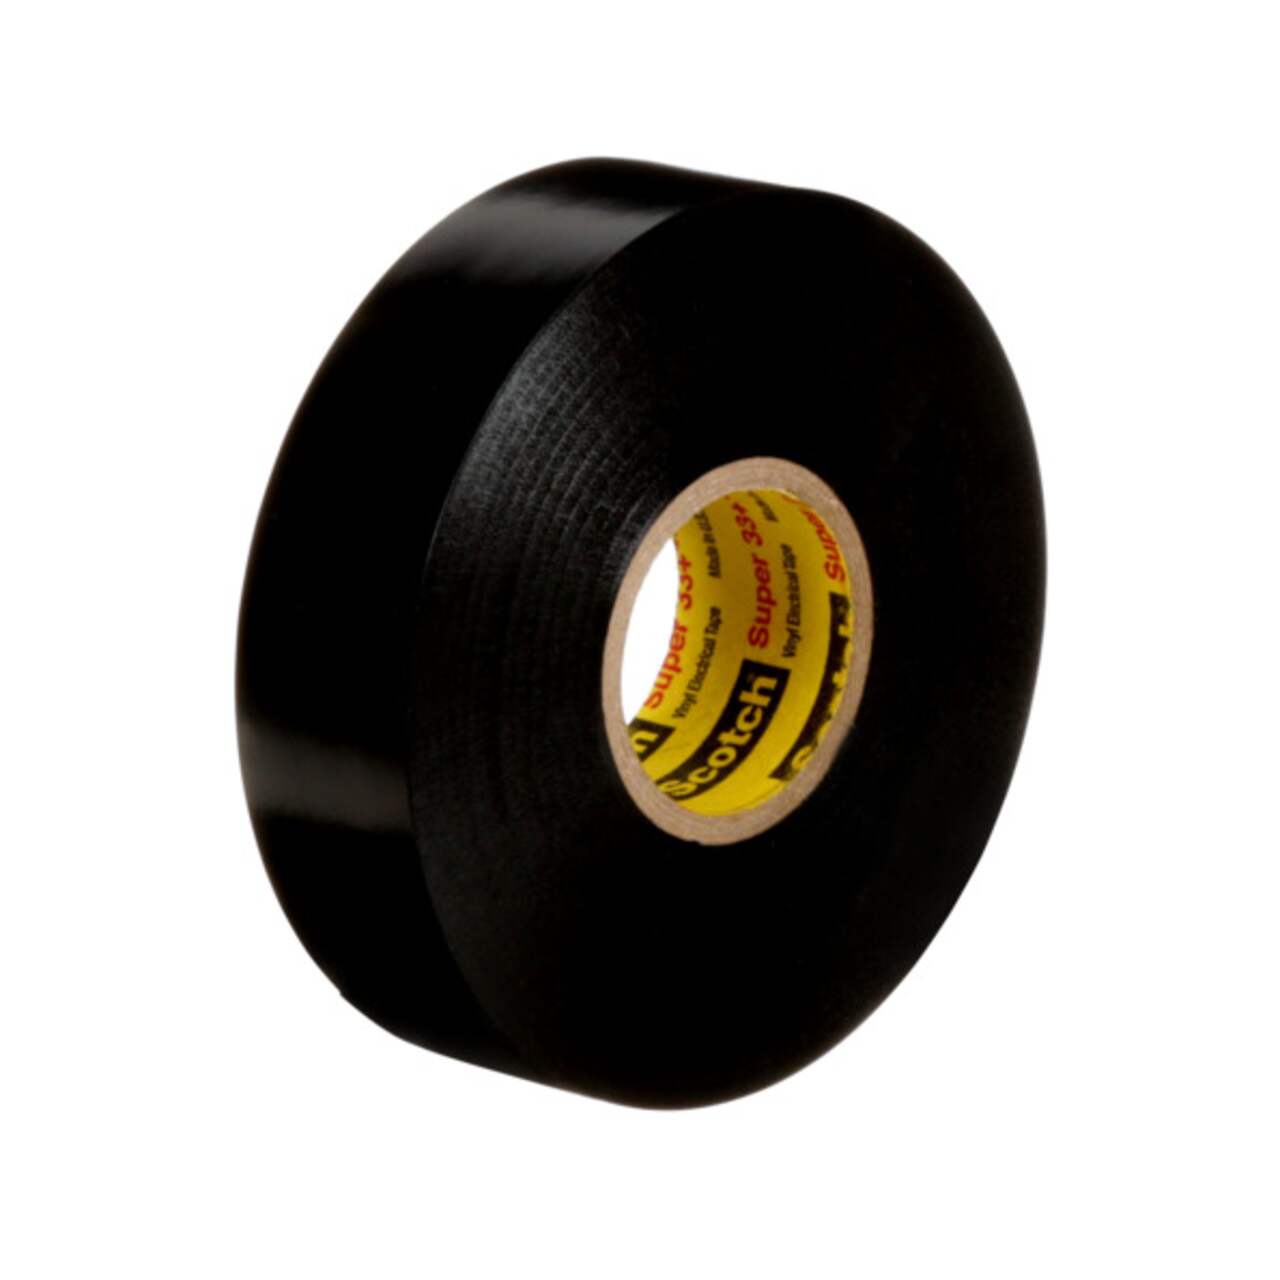 https://media-www.canadiantire.ca/product/fixing/electrical/rough-electrical/0529144/3m-super-33-electrical-tape-66--3a55af1b-bbb9-4e34-96ef-e66973d0b572.png?imdensity=1&imwidth=640&impolicy=mZoom